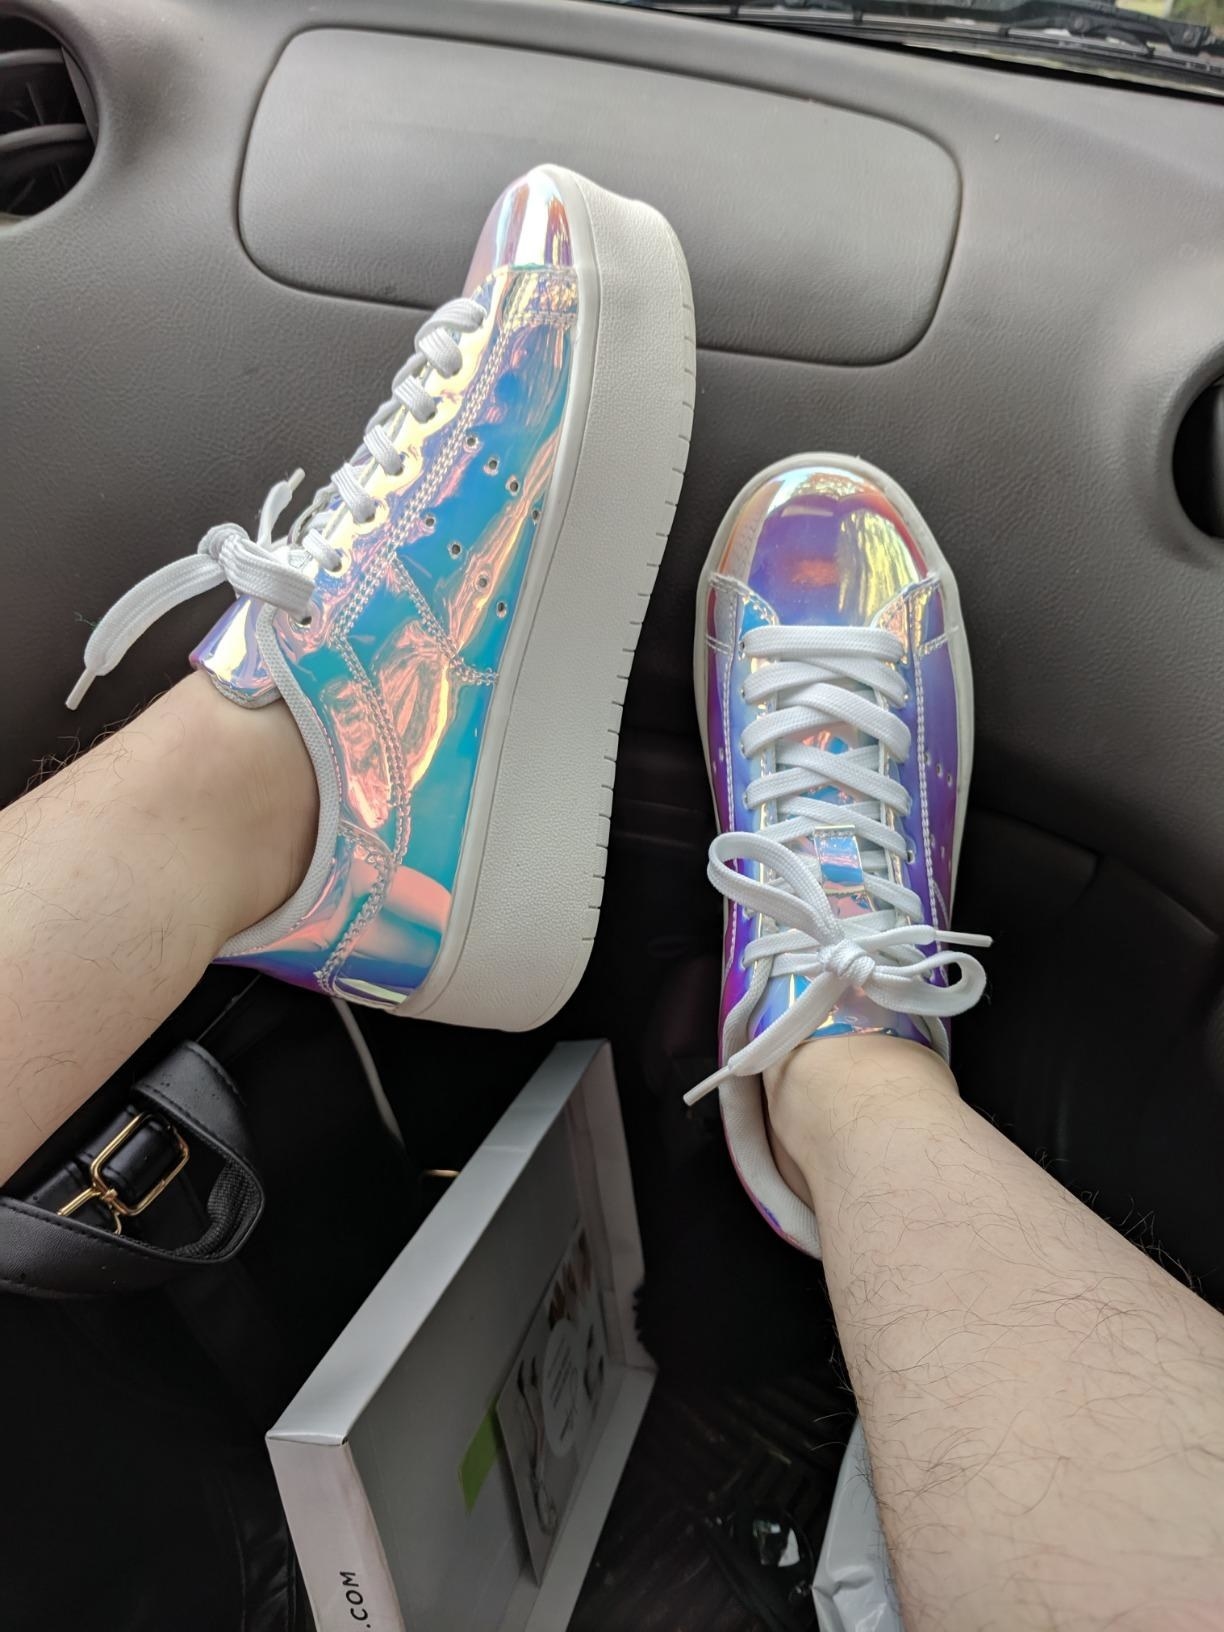 Reviewer pic of the shoes with a chunky white sole and shiny iridescent fabric all over the rest of the shoe